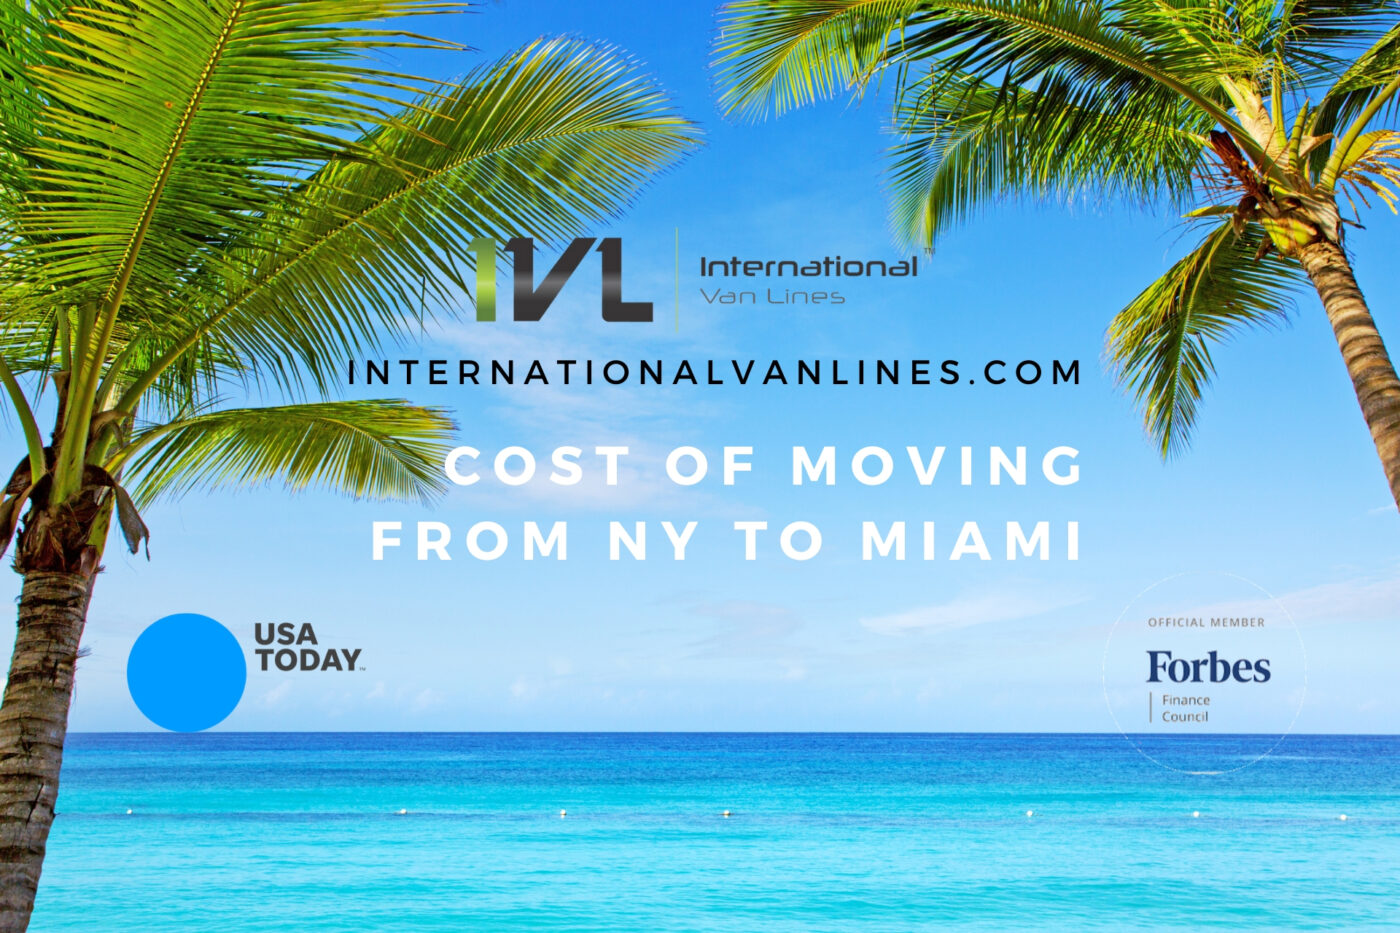 The cost of moving can vary. Florida is a beautiful place to live, especially Miami